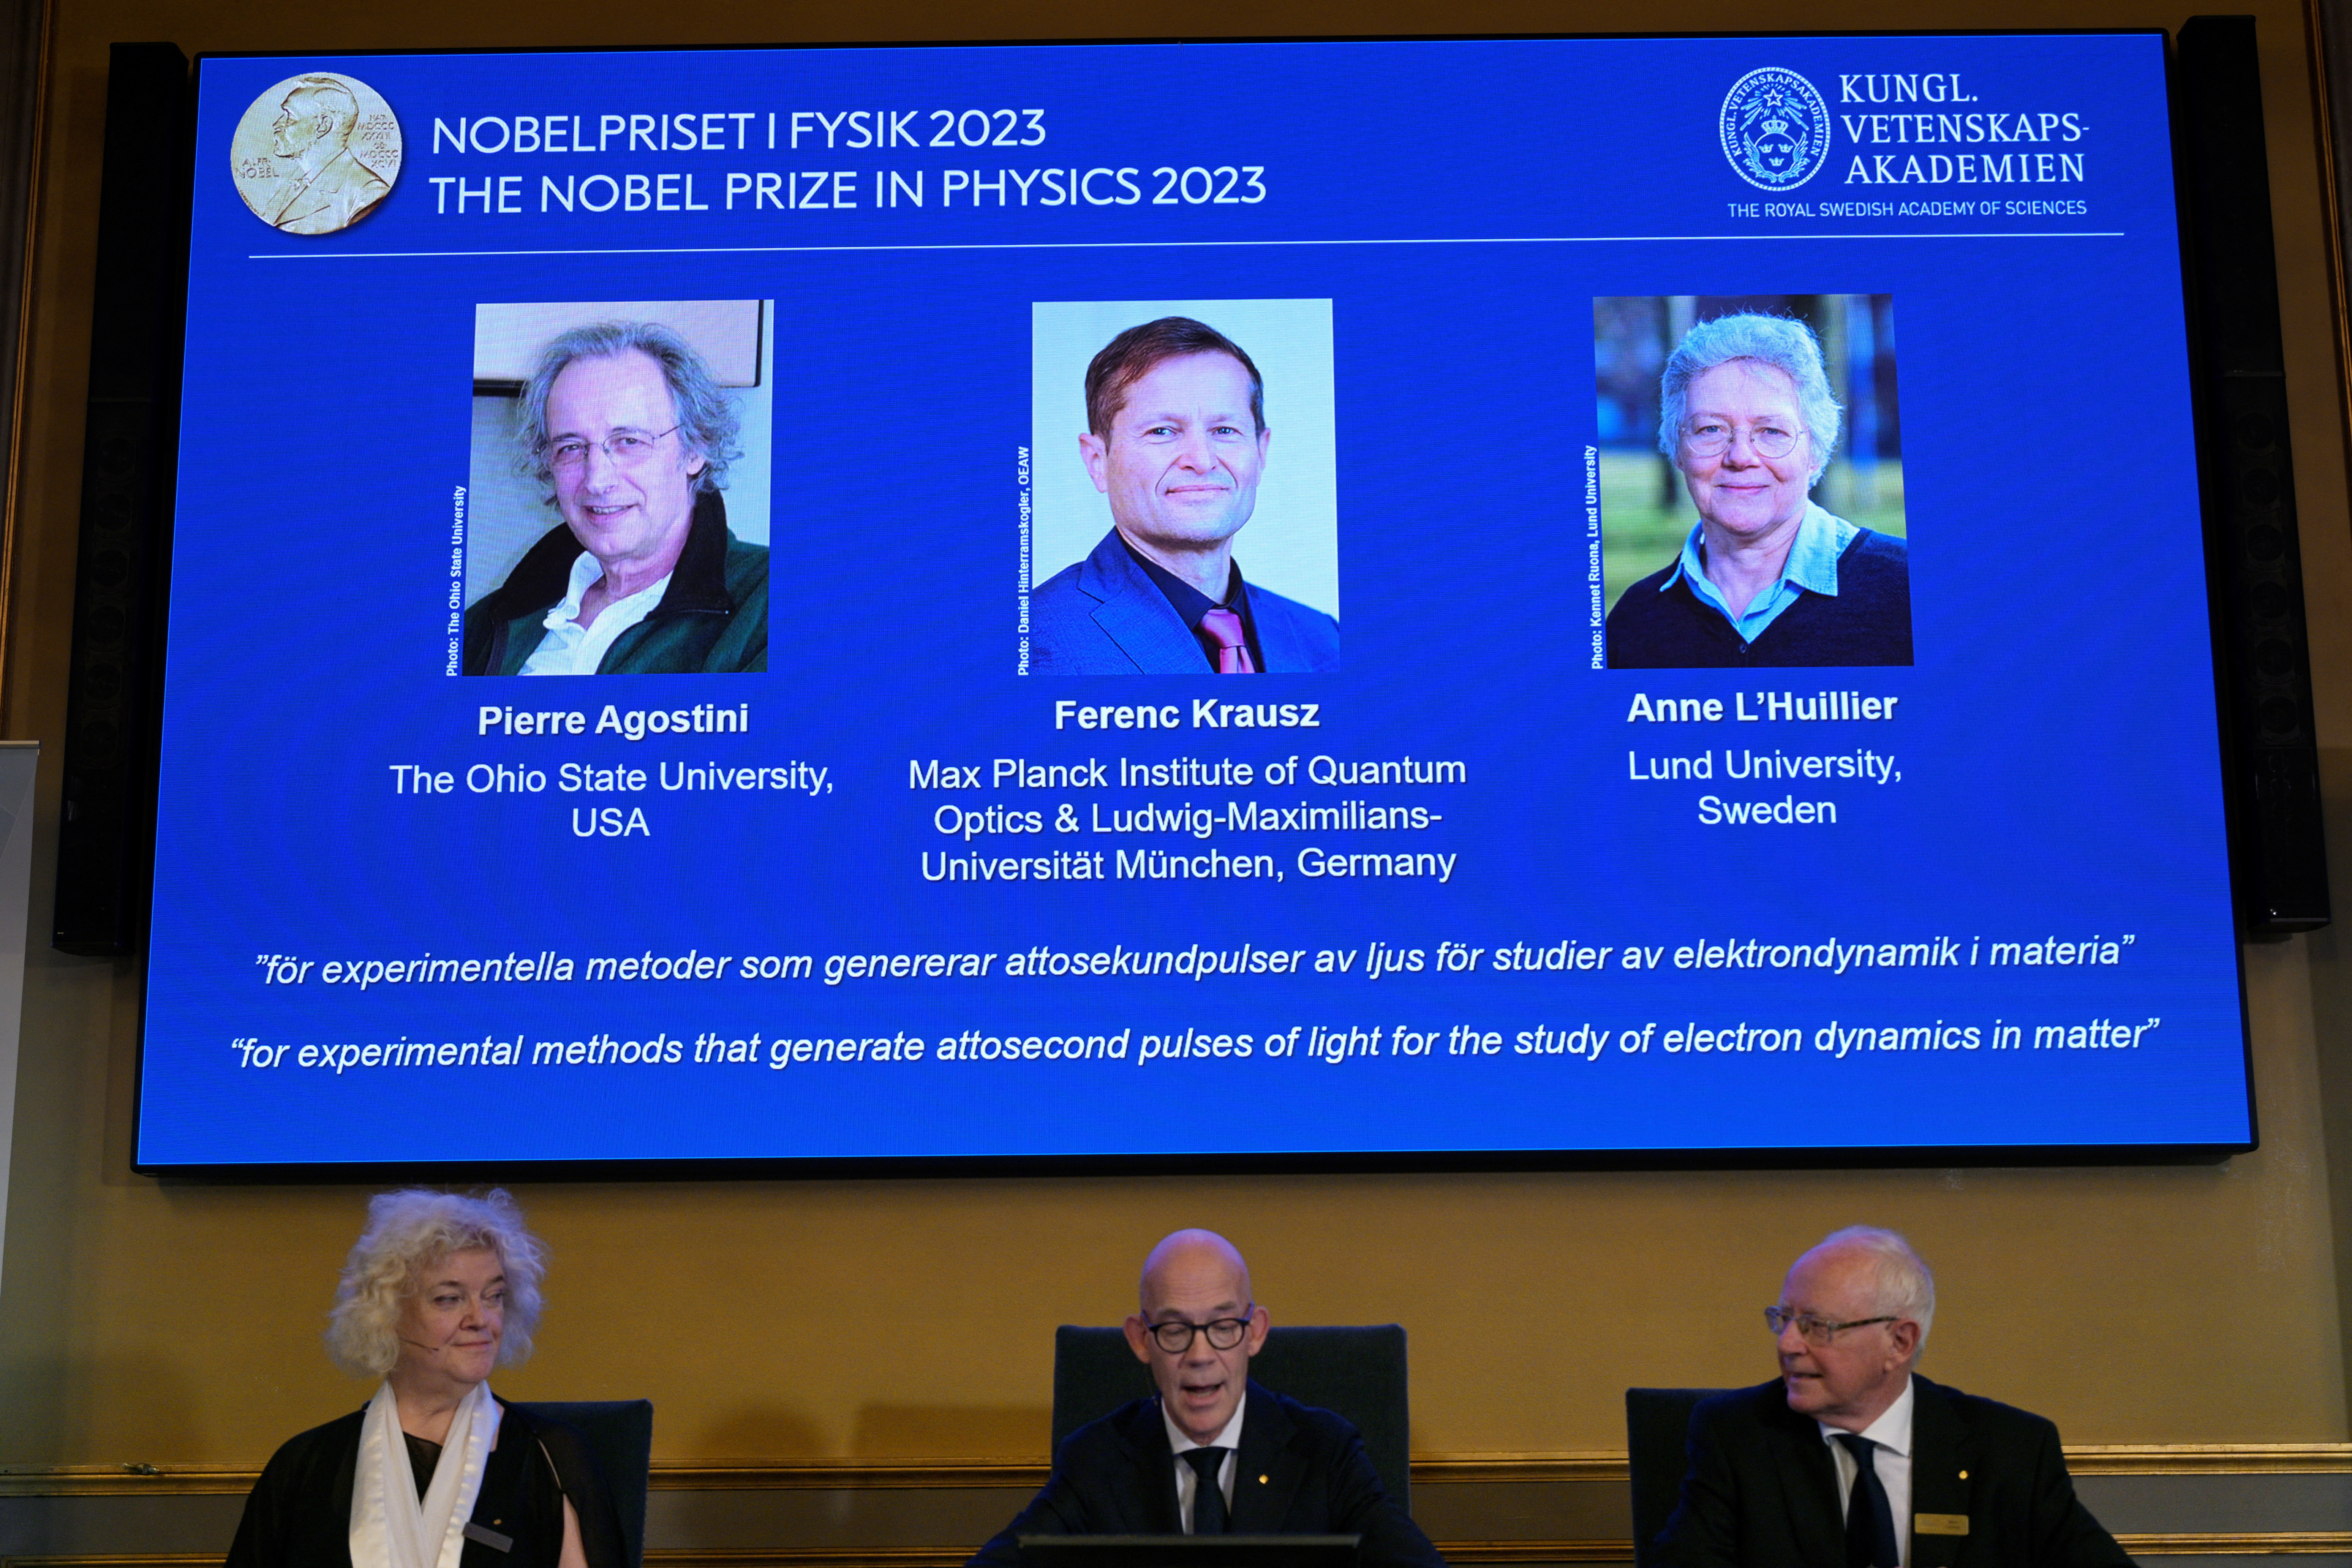 Nobel Prize in Physics, at the Royal Academy of Sciences in Stockholm